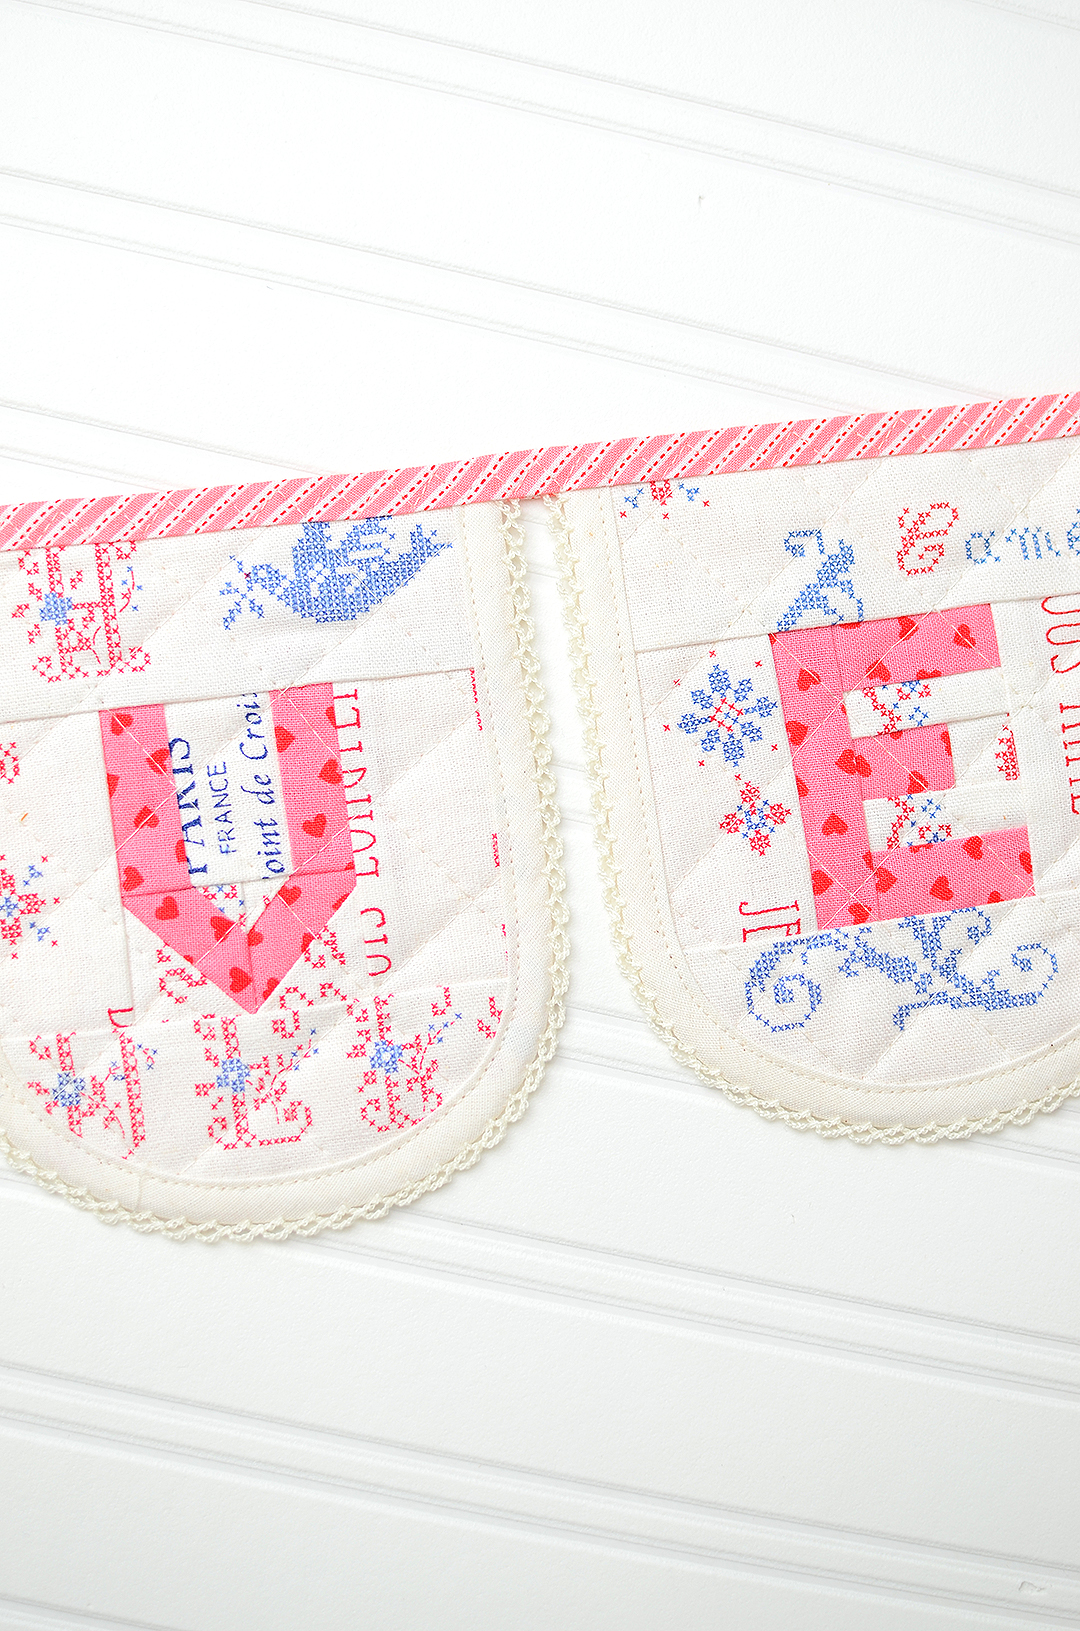 Quilted heart bunting tutorial - a heart quilt pattern by ellis & higgs